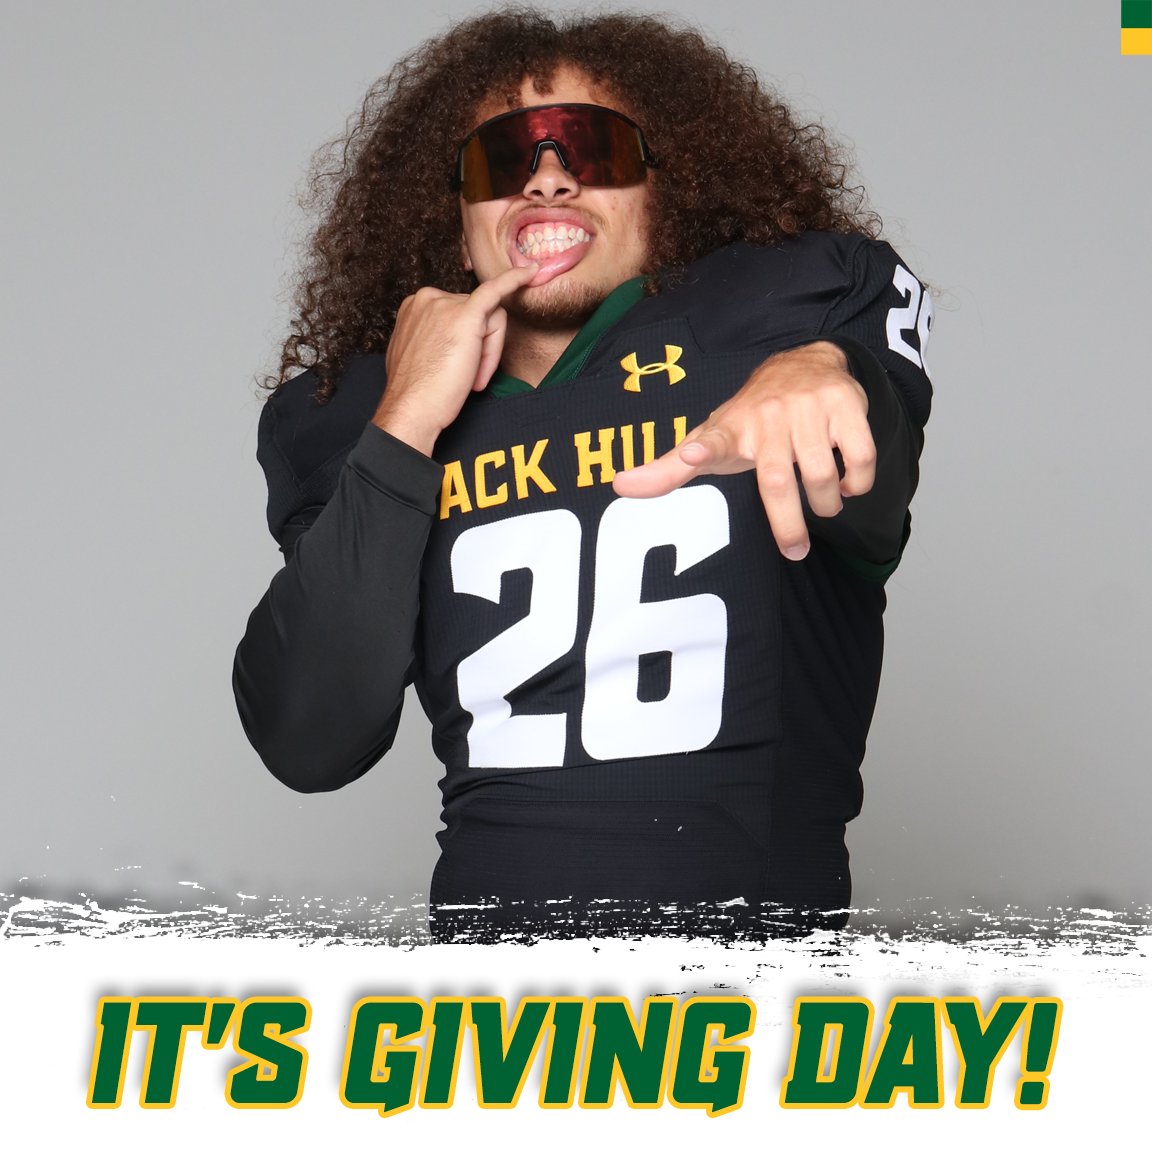 It's here! Let's come together and reach this goal today for BHSU Football. We're at $4,500 as of now. If 150 people give $100 today - we'll reach our fundraising goal. Please consider giving to our program to help our young men! Thank you! LINK: fundraise.givesmart.com/vf/24JGB/BHSUF…